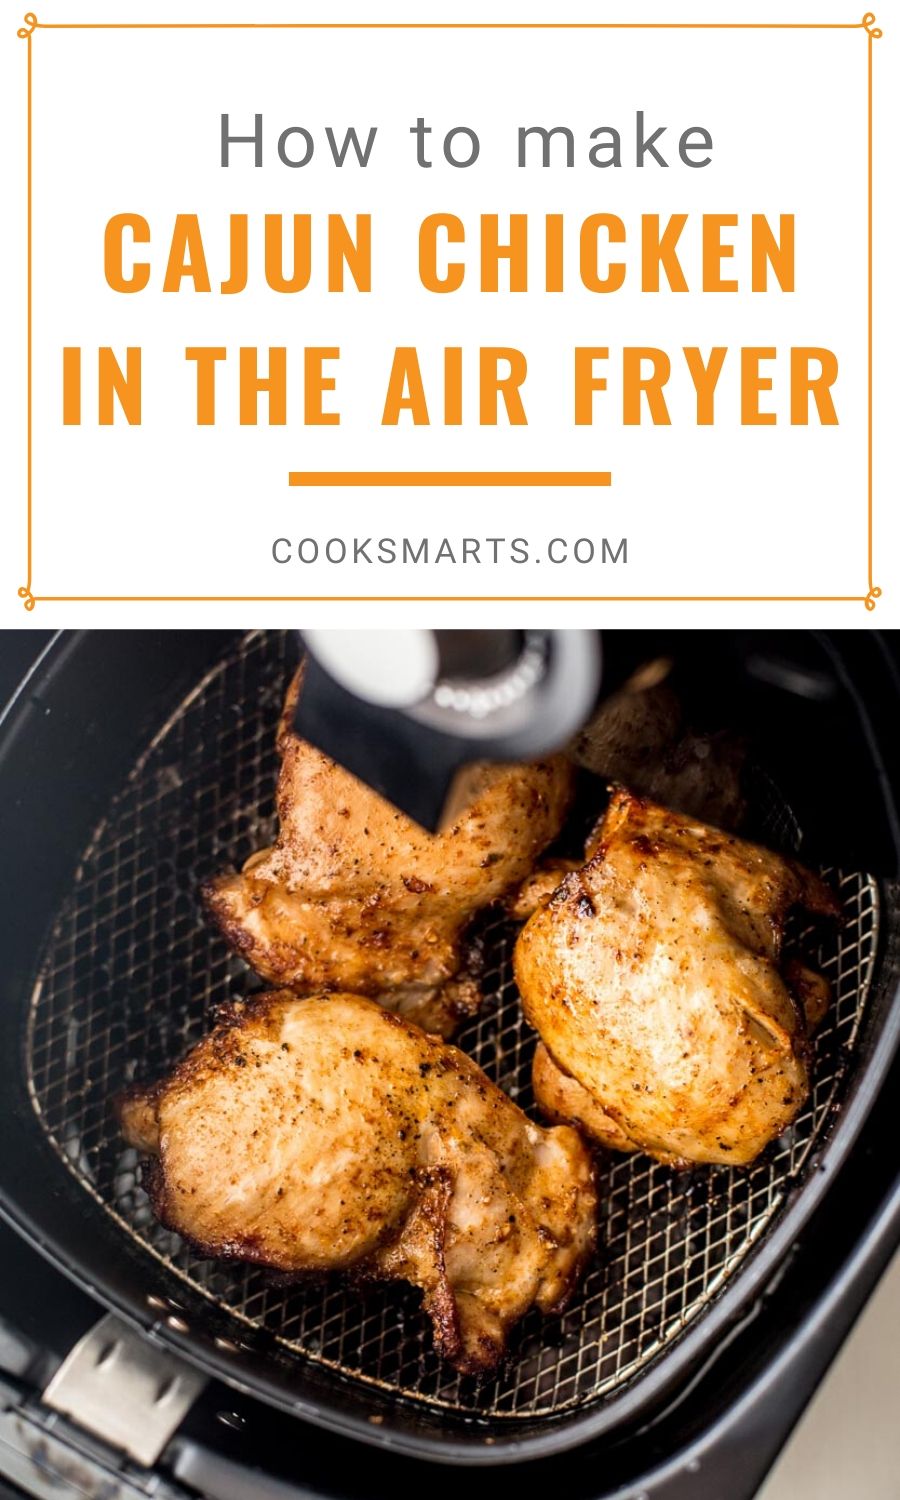 How to Make Jerk Chicken in an Air Fryer | Cook Smarts